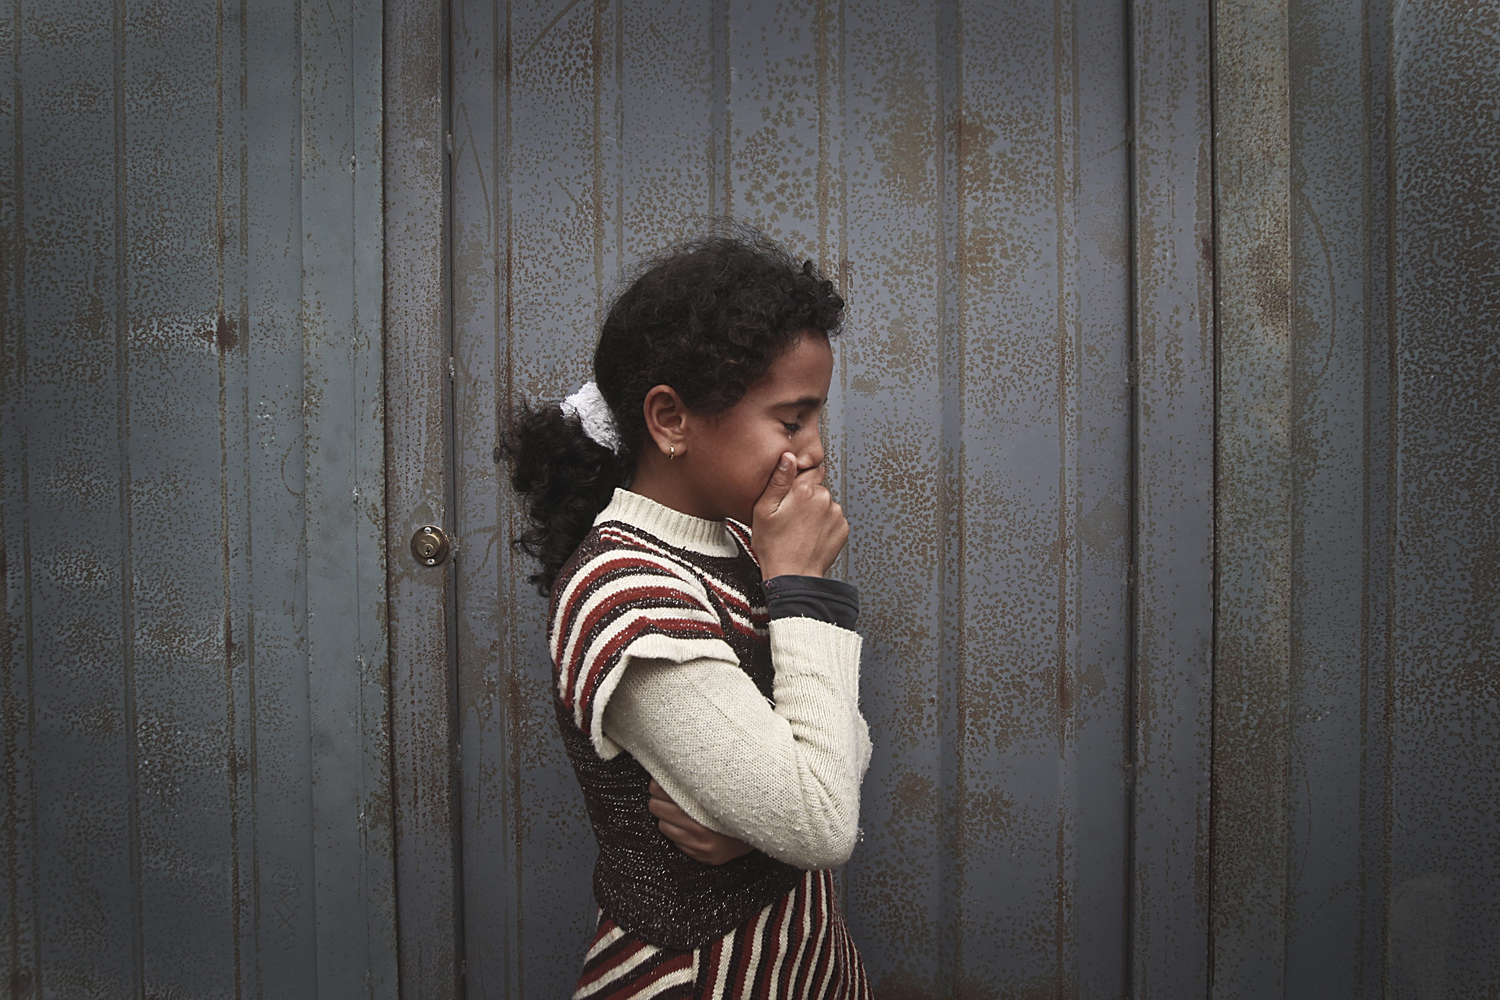 Image: Nov. 9. 2012. The sister of 11-year-old Ahmed Abu Dagah cries during the funeral of her brother in Khan Younis in the southern Gaza Strip.